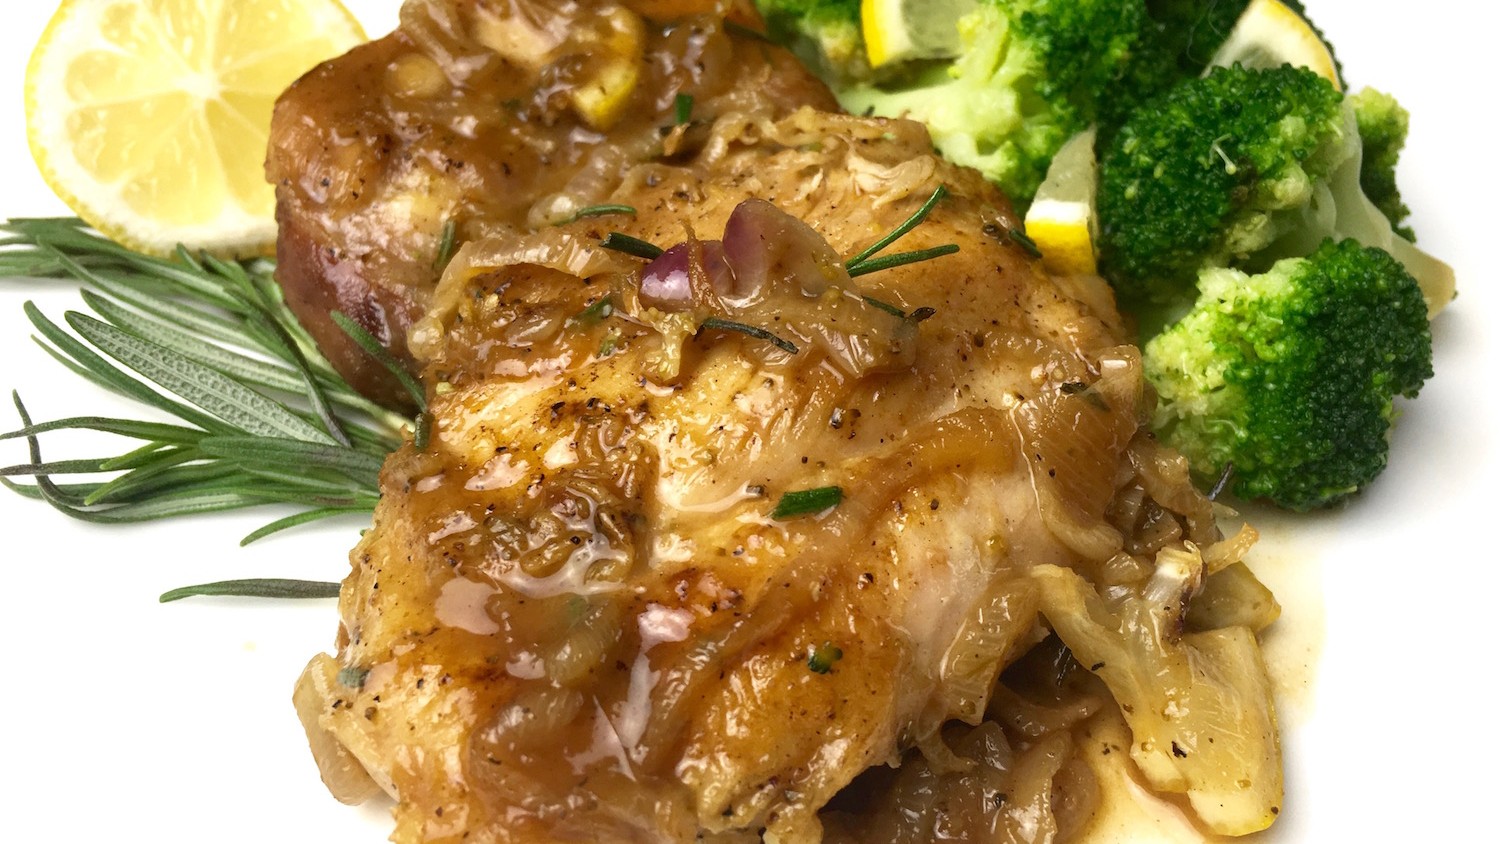 Image of One Skillet Lemon-Rosemary Chicken Thighs with Broccoli 